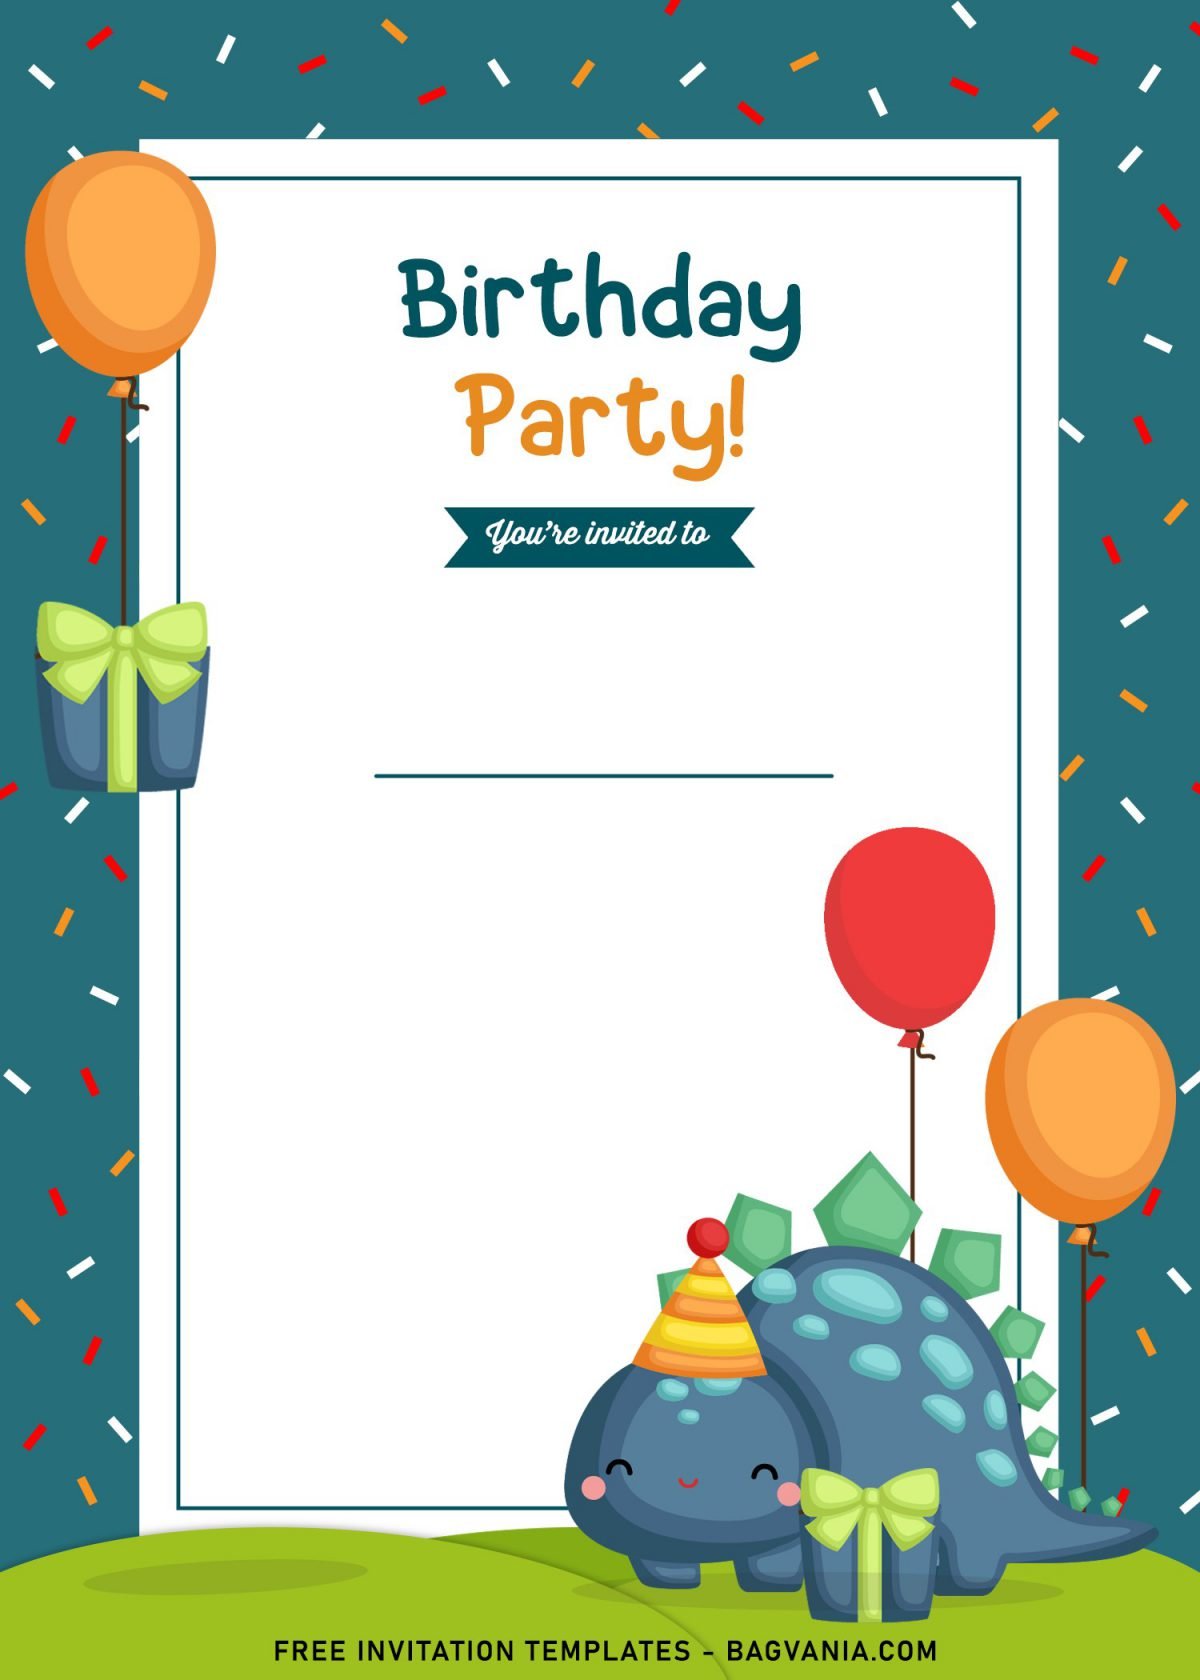 9+ Awesome Dino Party Birthday Invitation Templates and has Balloons And Birthday Gift Boxes